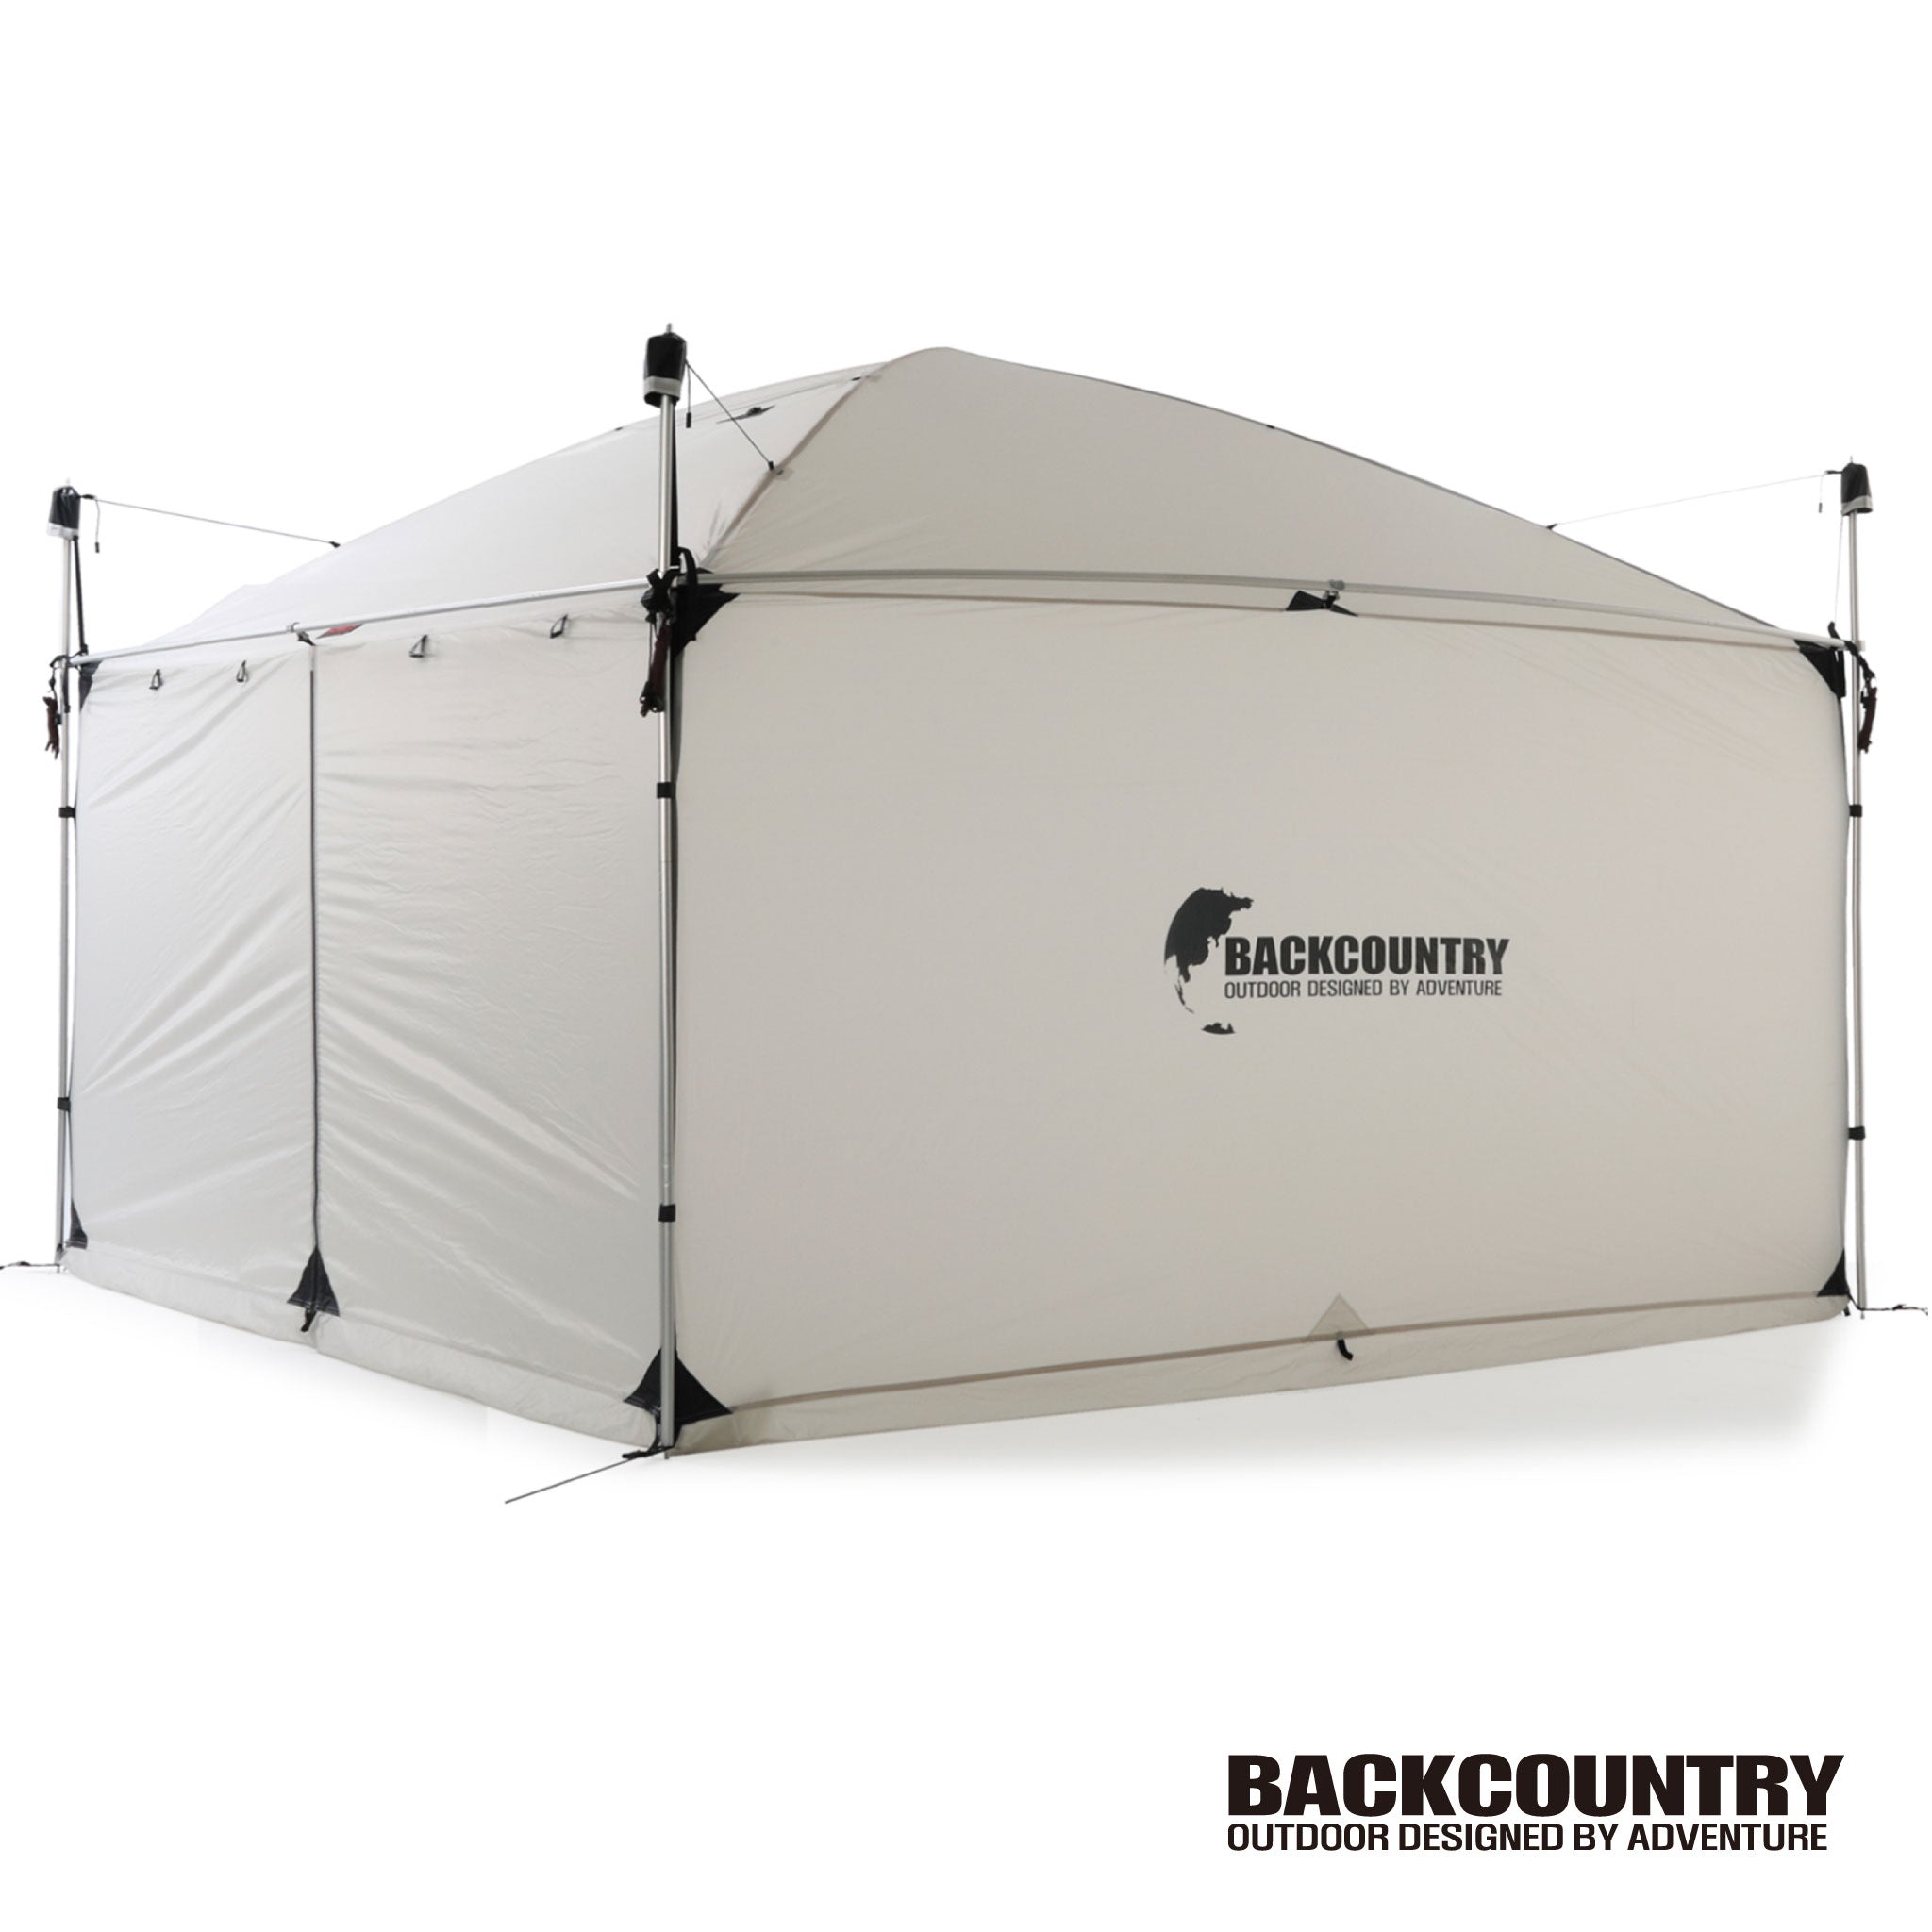 BackCountry 240 shelter L.GRAY – eight